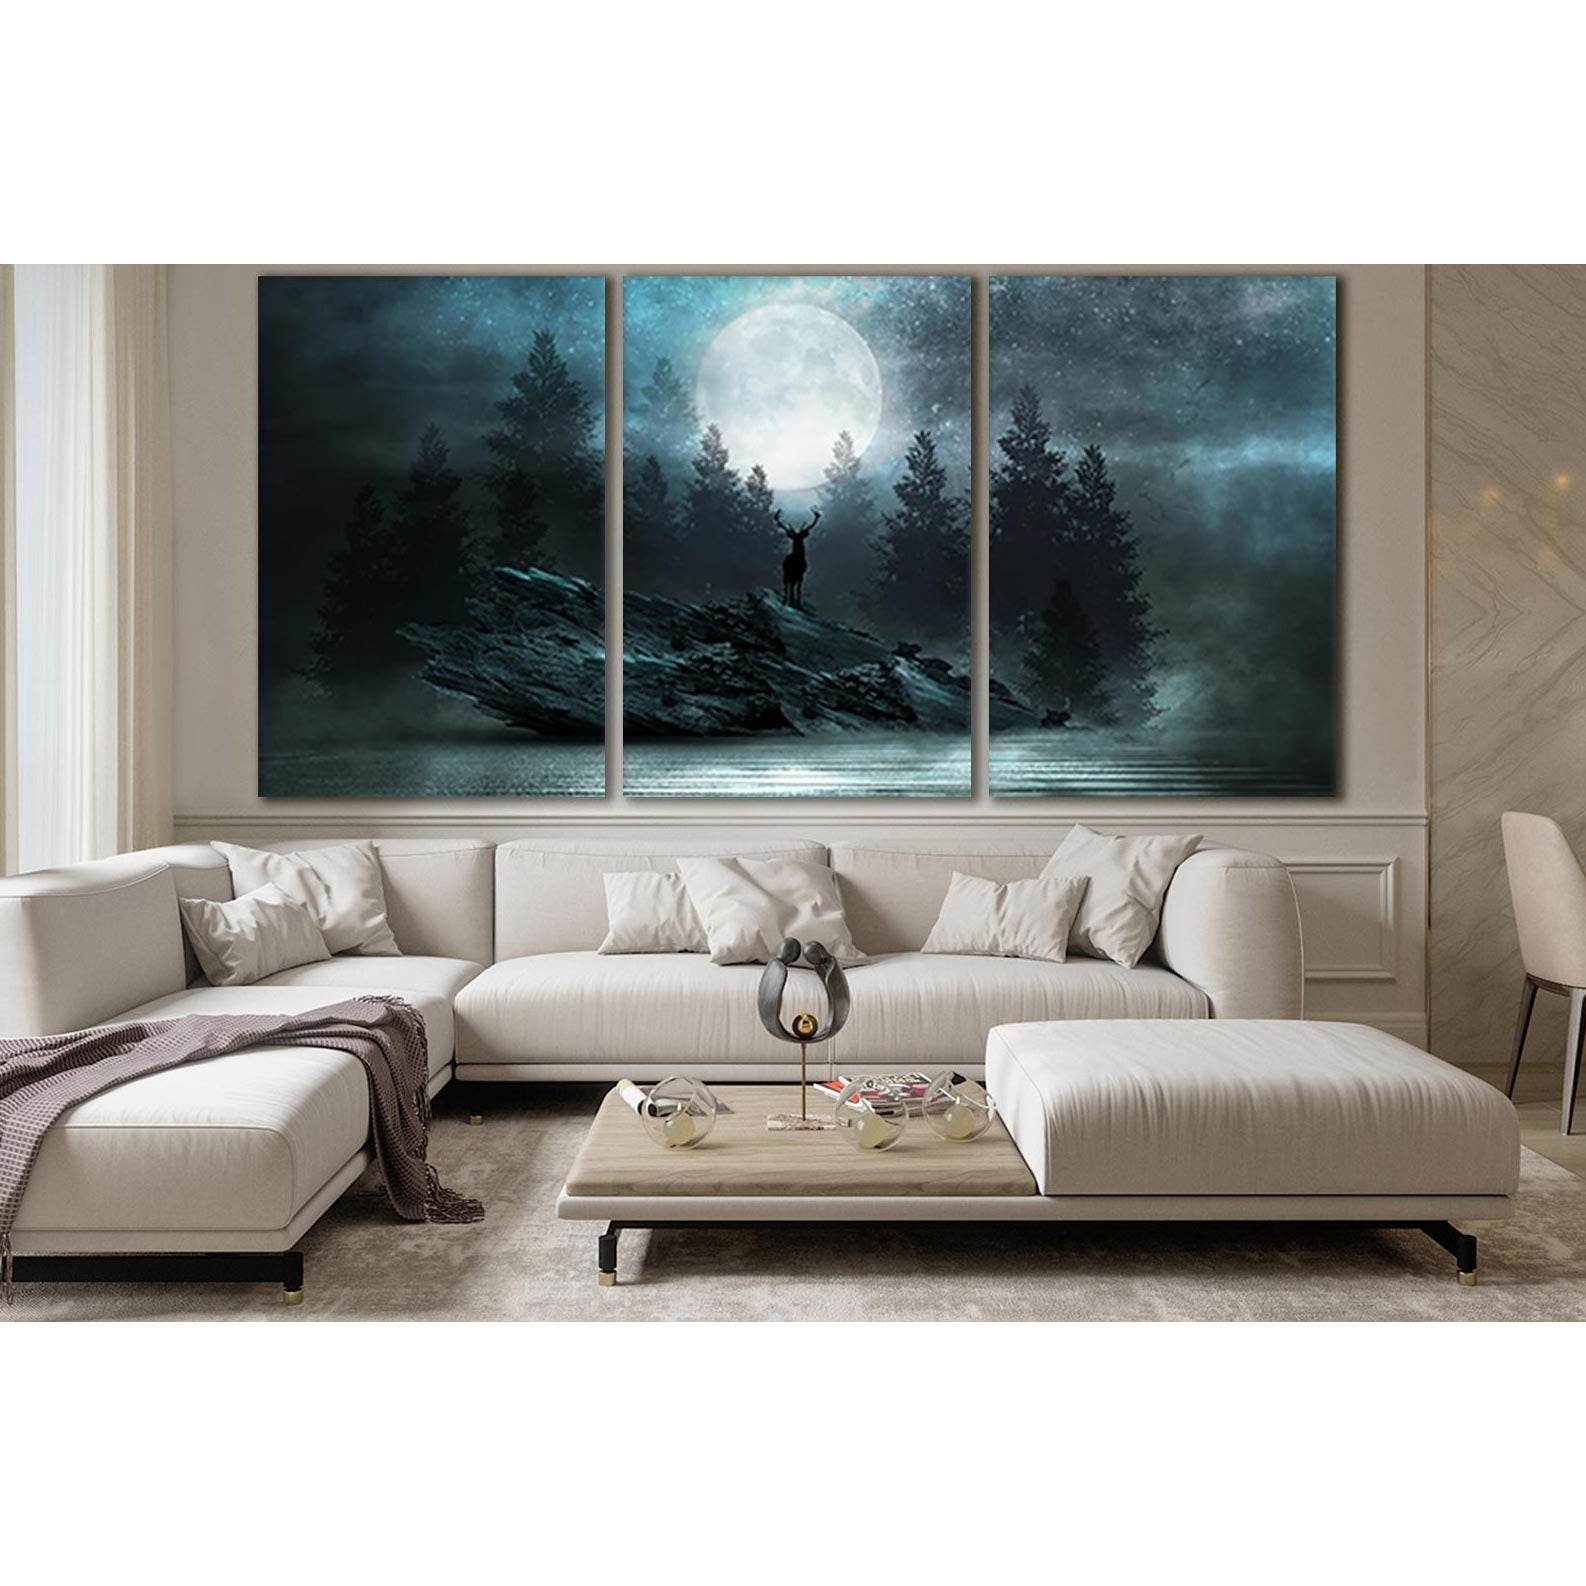 Deer On A Rock Under The Moon №SL1238 Ready to Hang Canvas Print